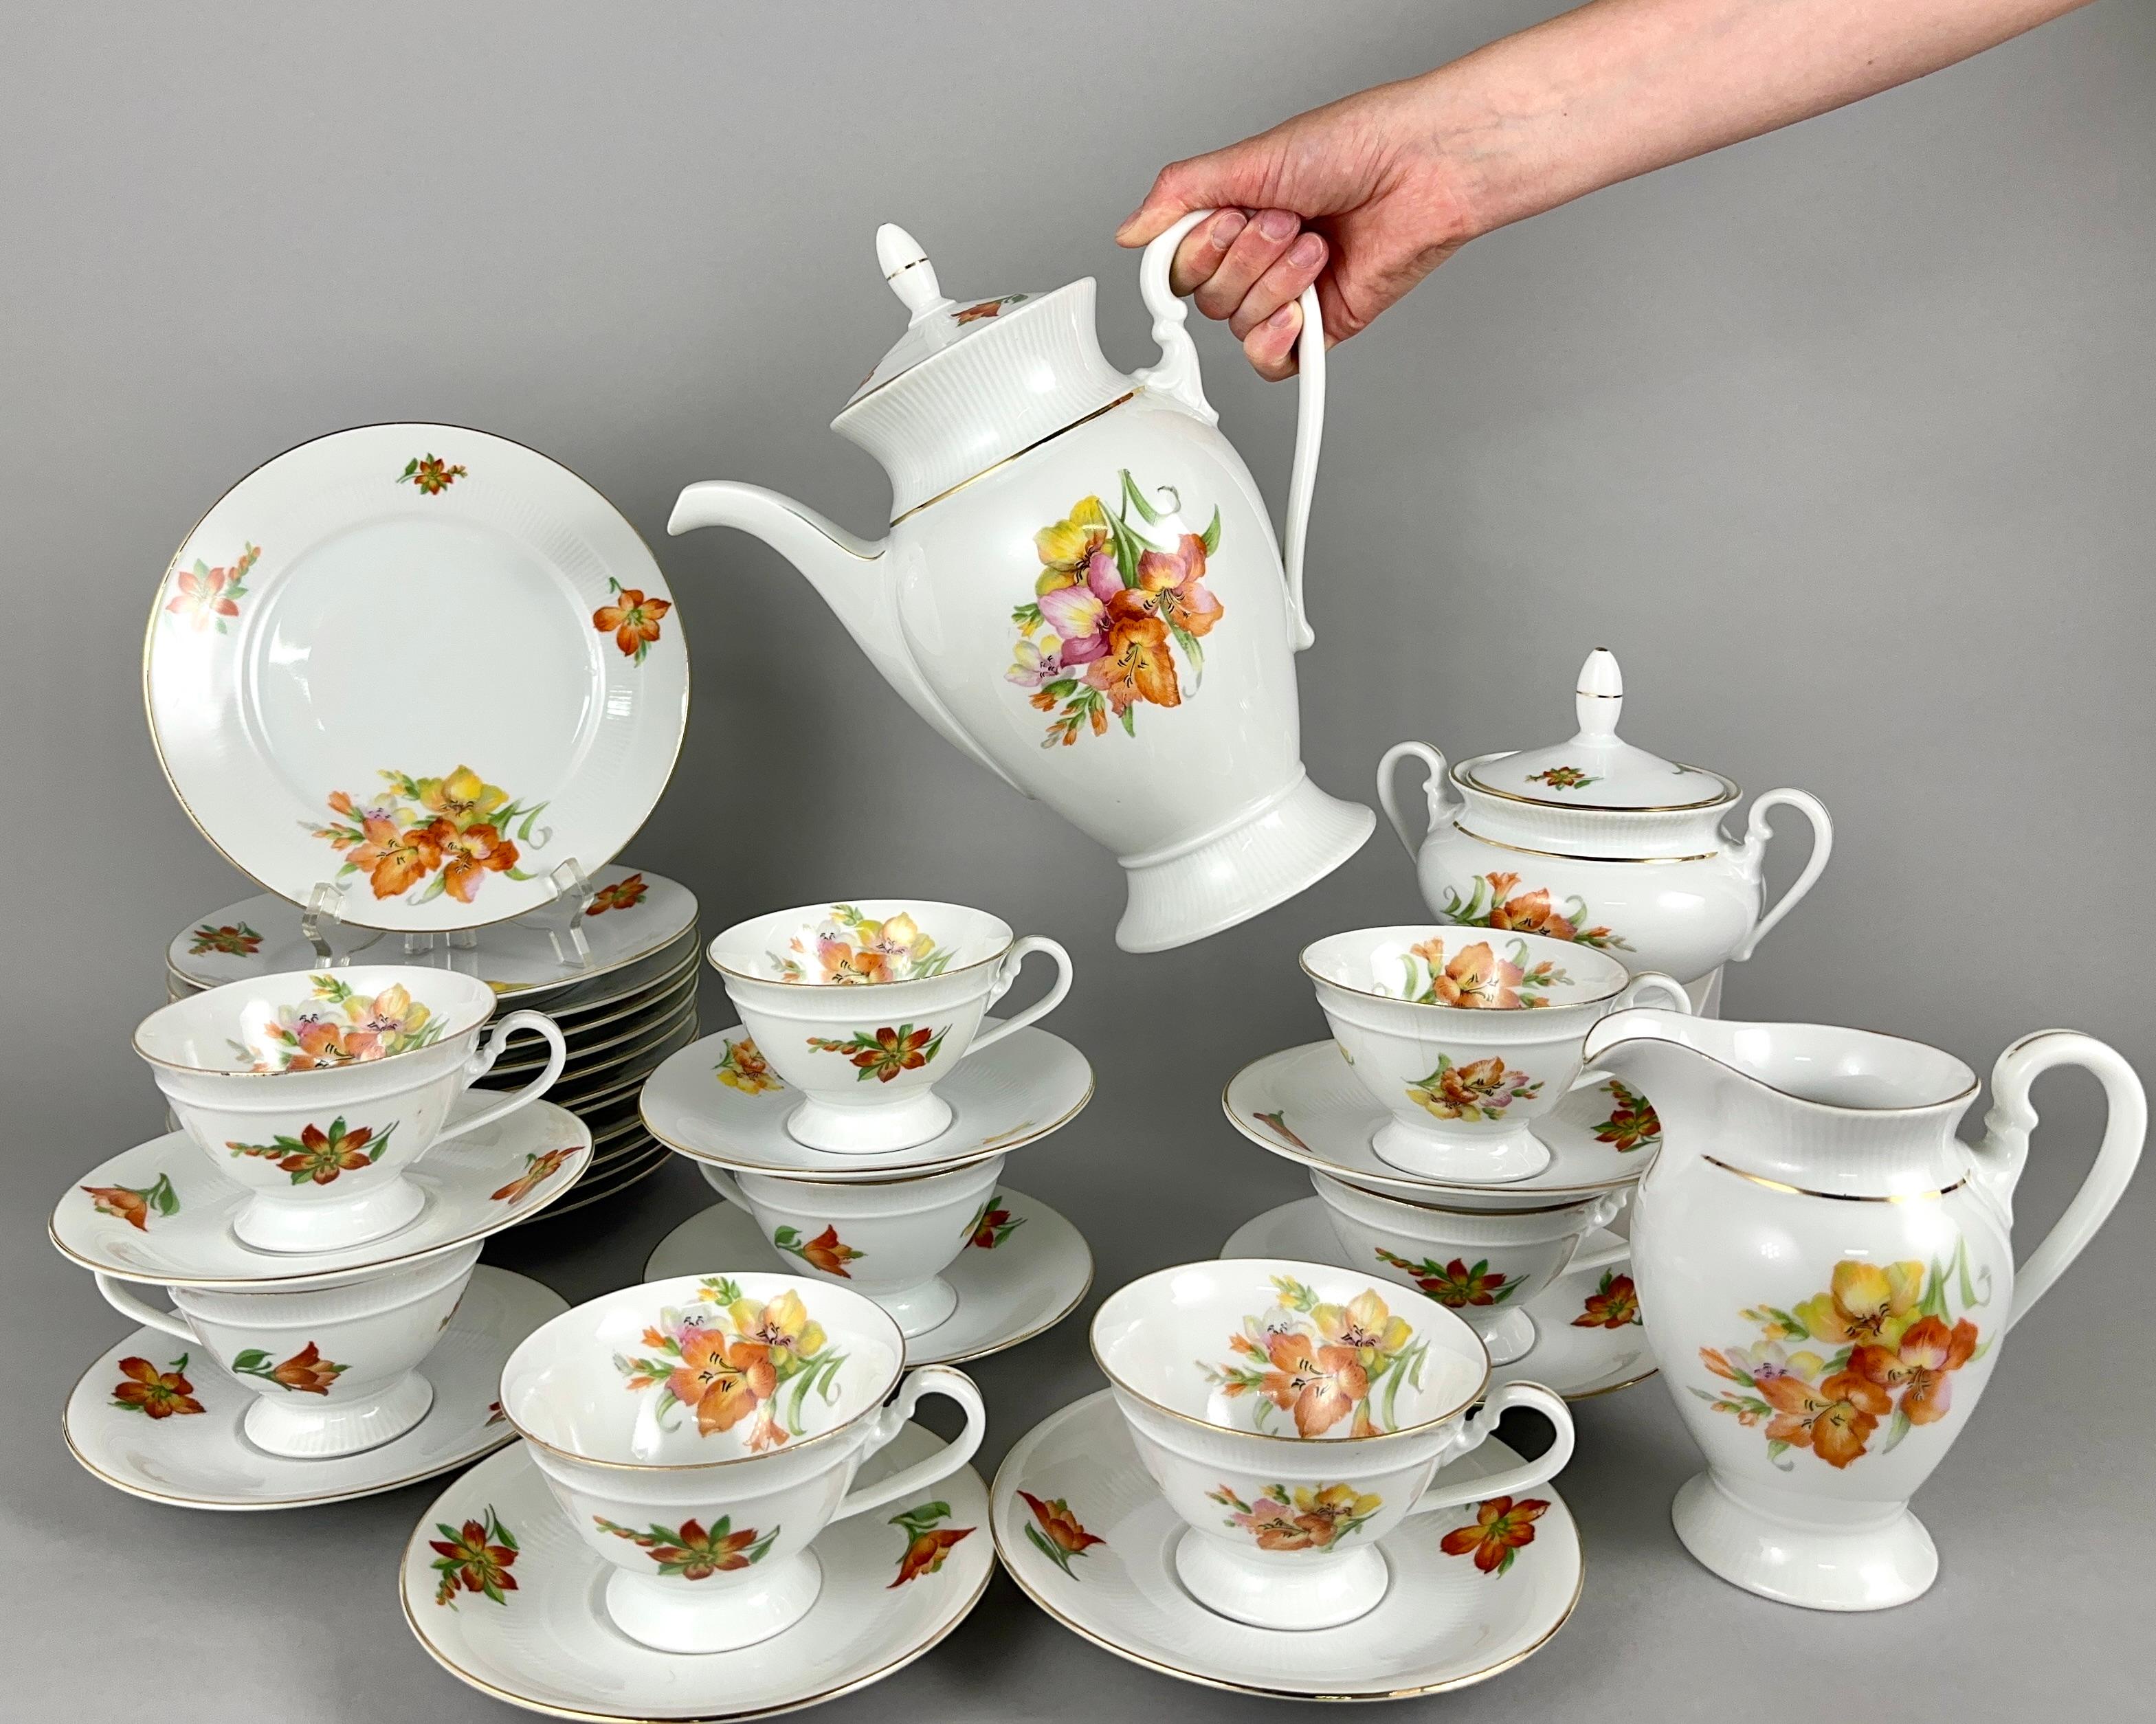 Vintage porcelain coffee or tea service set, consists of 31 pieces in an off-white cream colored porcelain with floral pattern and gold rims.

Made by Edelstein Bavaria Germany.

On the base of the service is the logo of Edelstein Bavaria and the